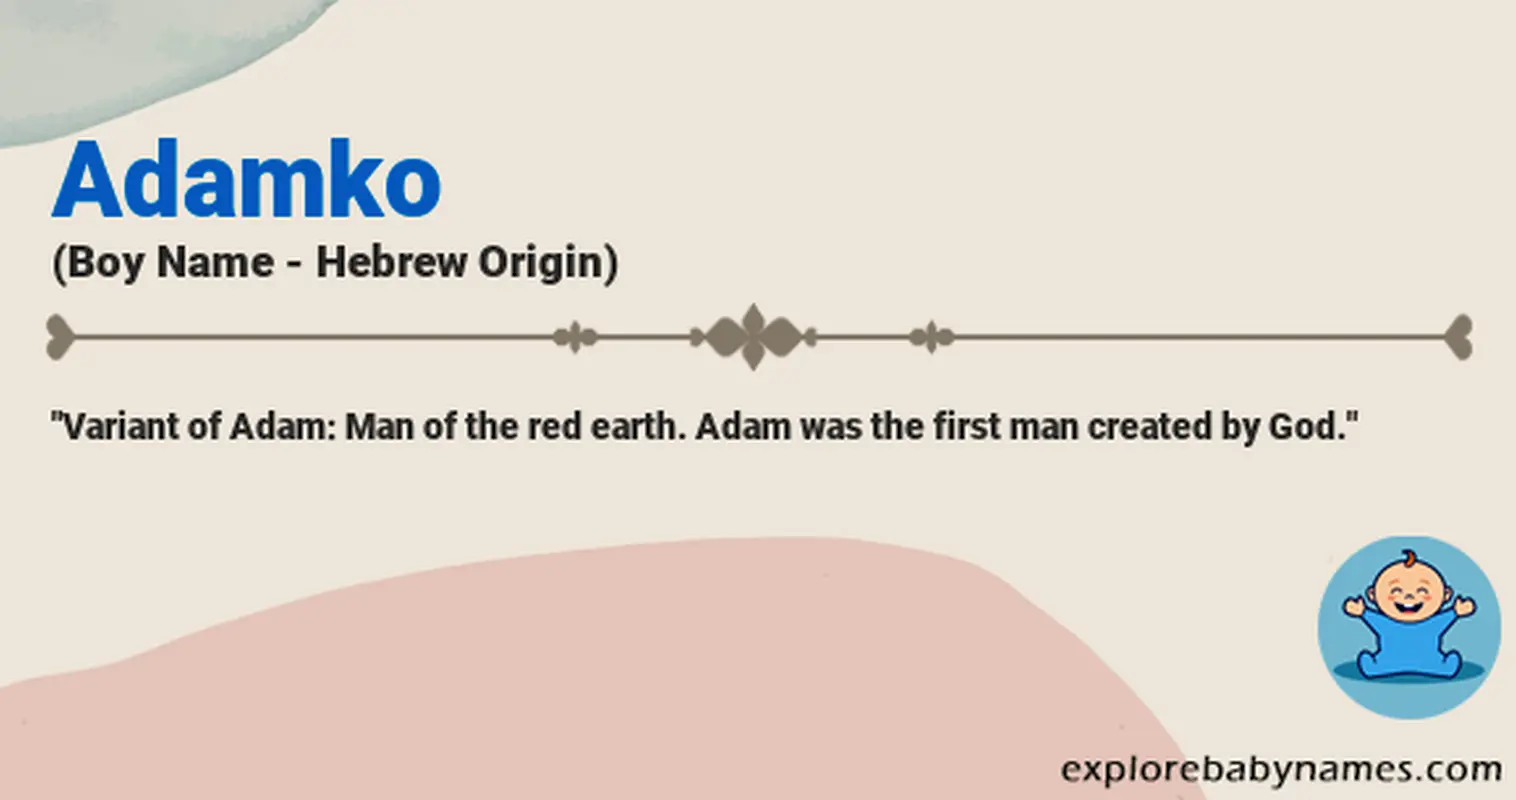 Meaning of Adamko